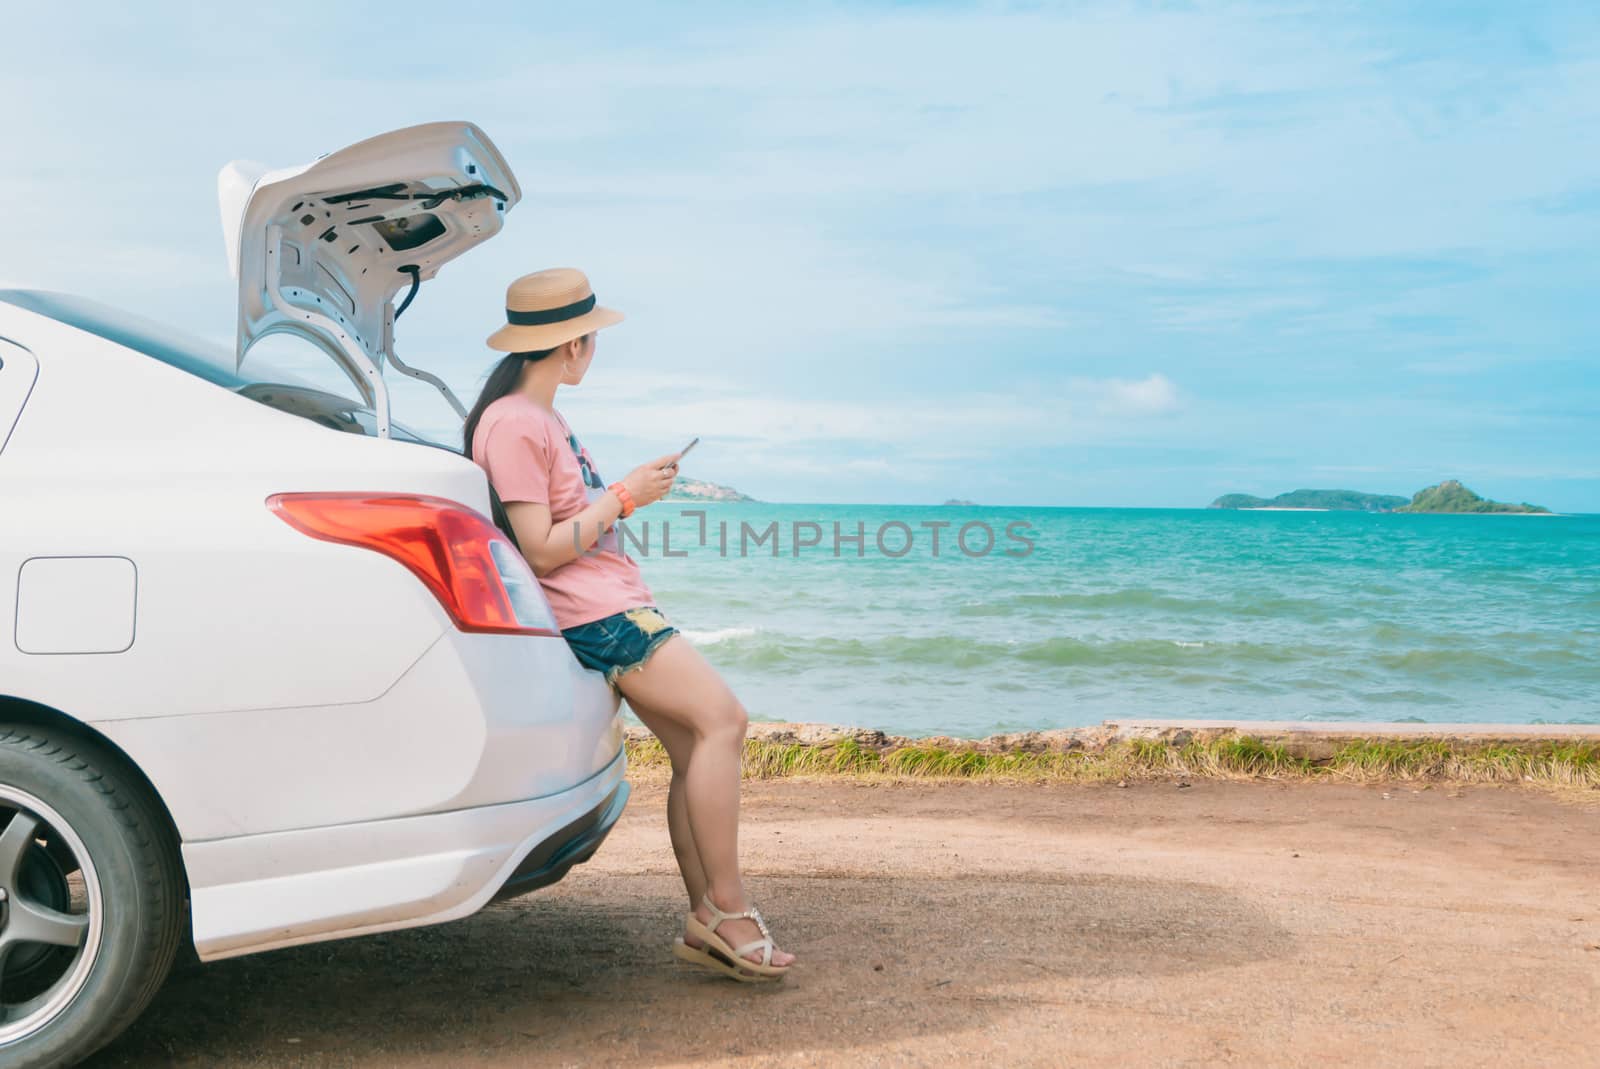 Women hold a smartphone sitting with a beach car